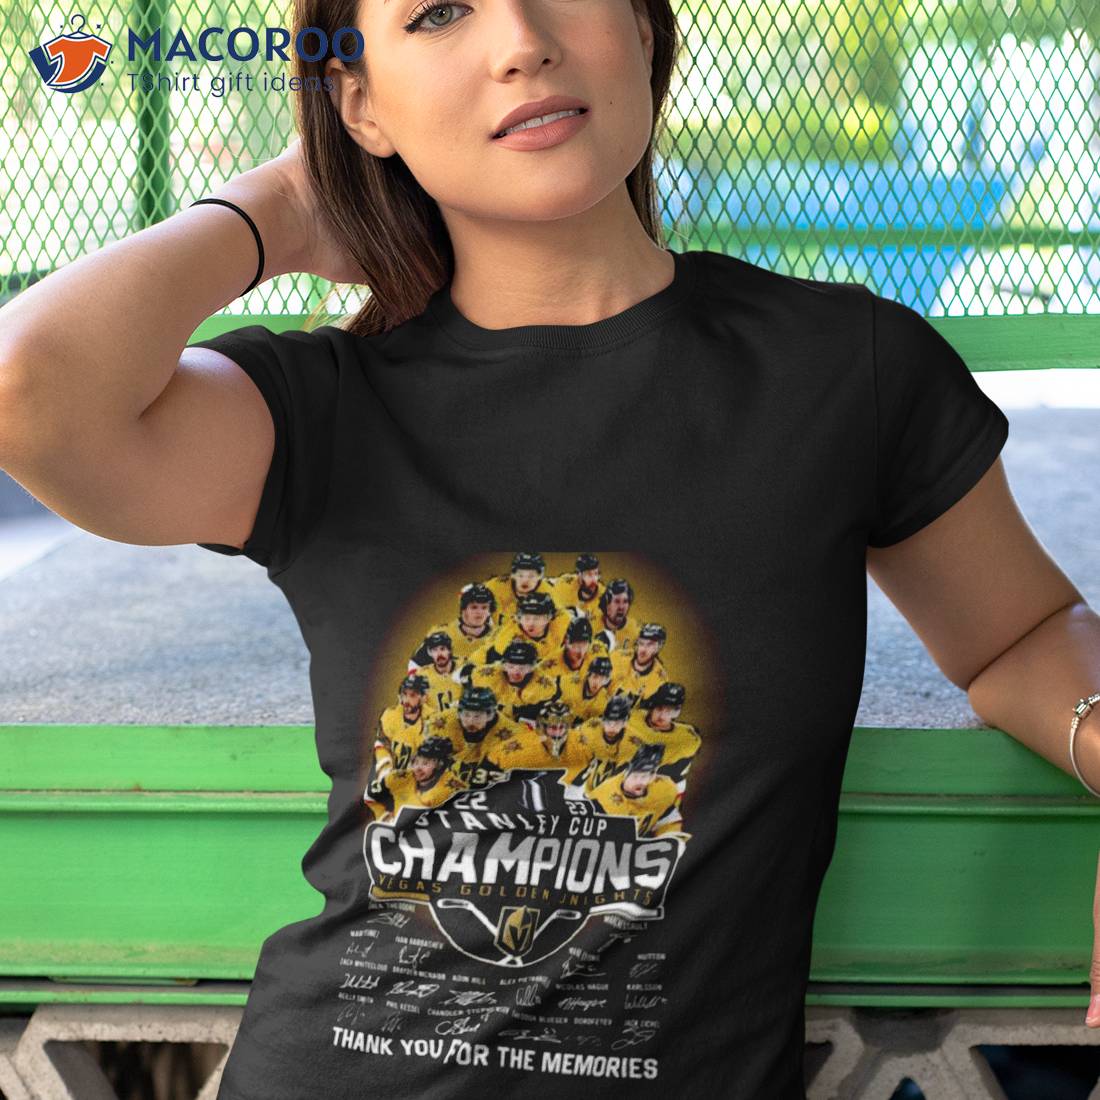 https://images.macoroo.com/wp-content/uploads/2023/06/vegas-golden-knights-team-2023-stanley-cup-champions-thank-you-for-the-memories-signatures-shirt-tshirt-1.jpg